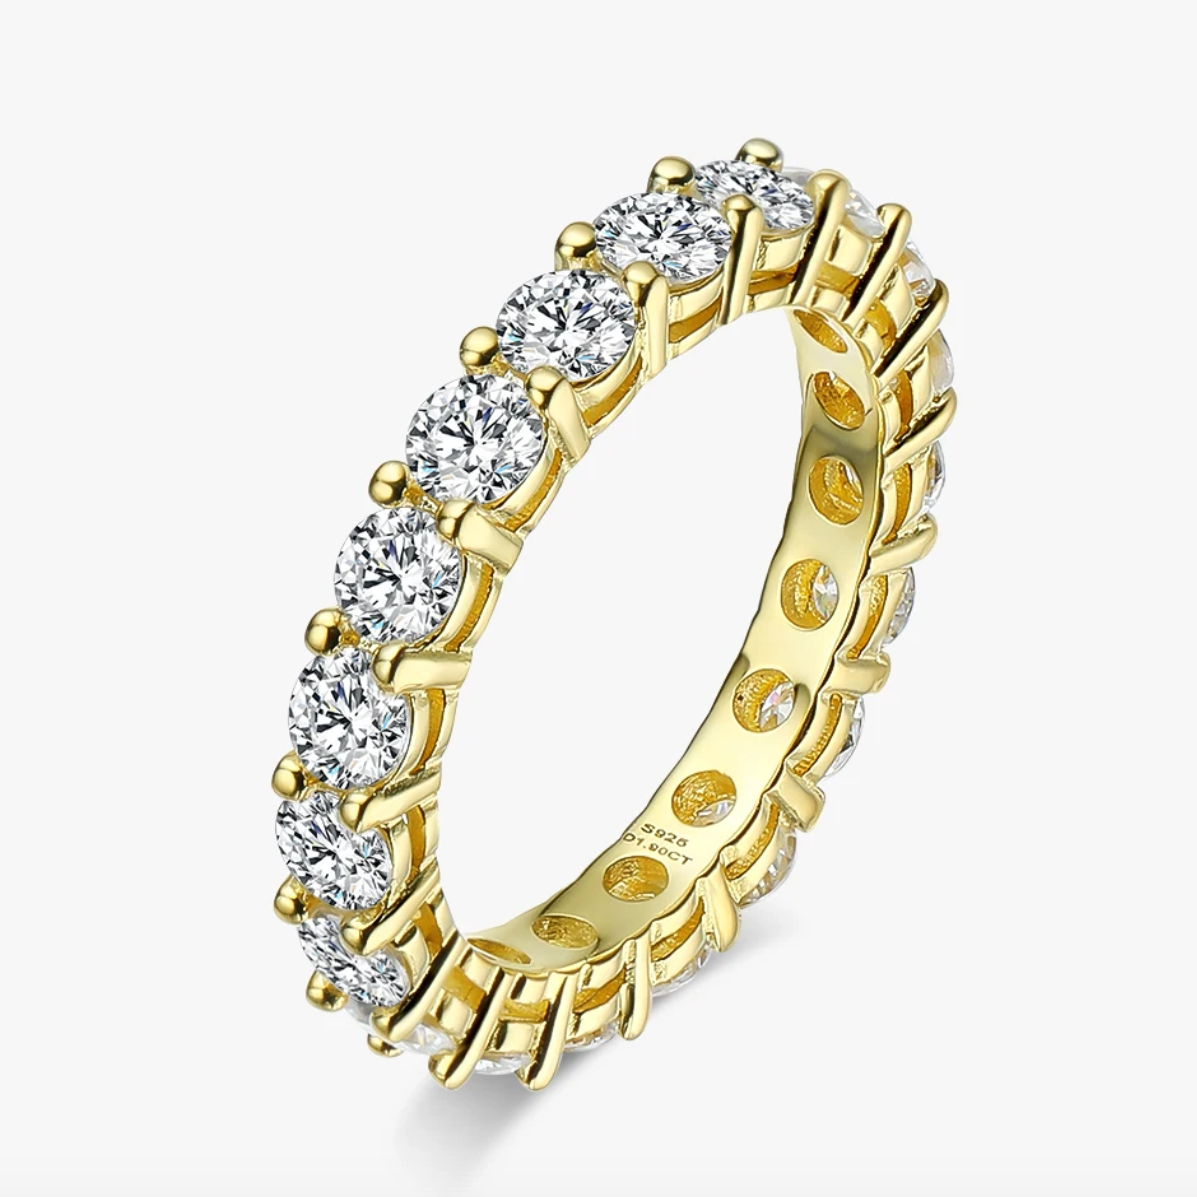 Classic Diamond Eternity Ring, 925 Sterling Silver Band by Margalit Rings, wedding jewelry, bridal jewelry, yellow gold